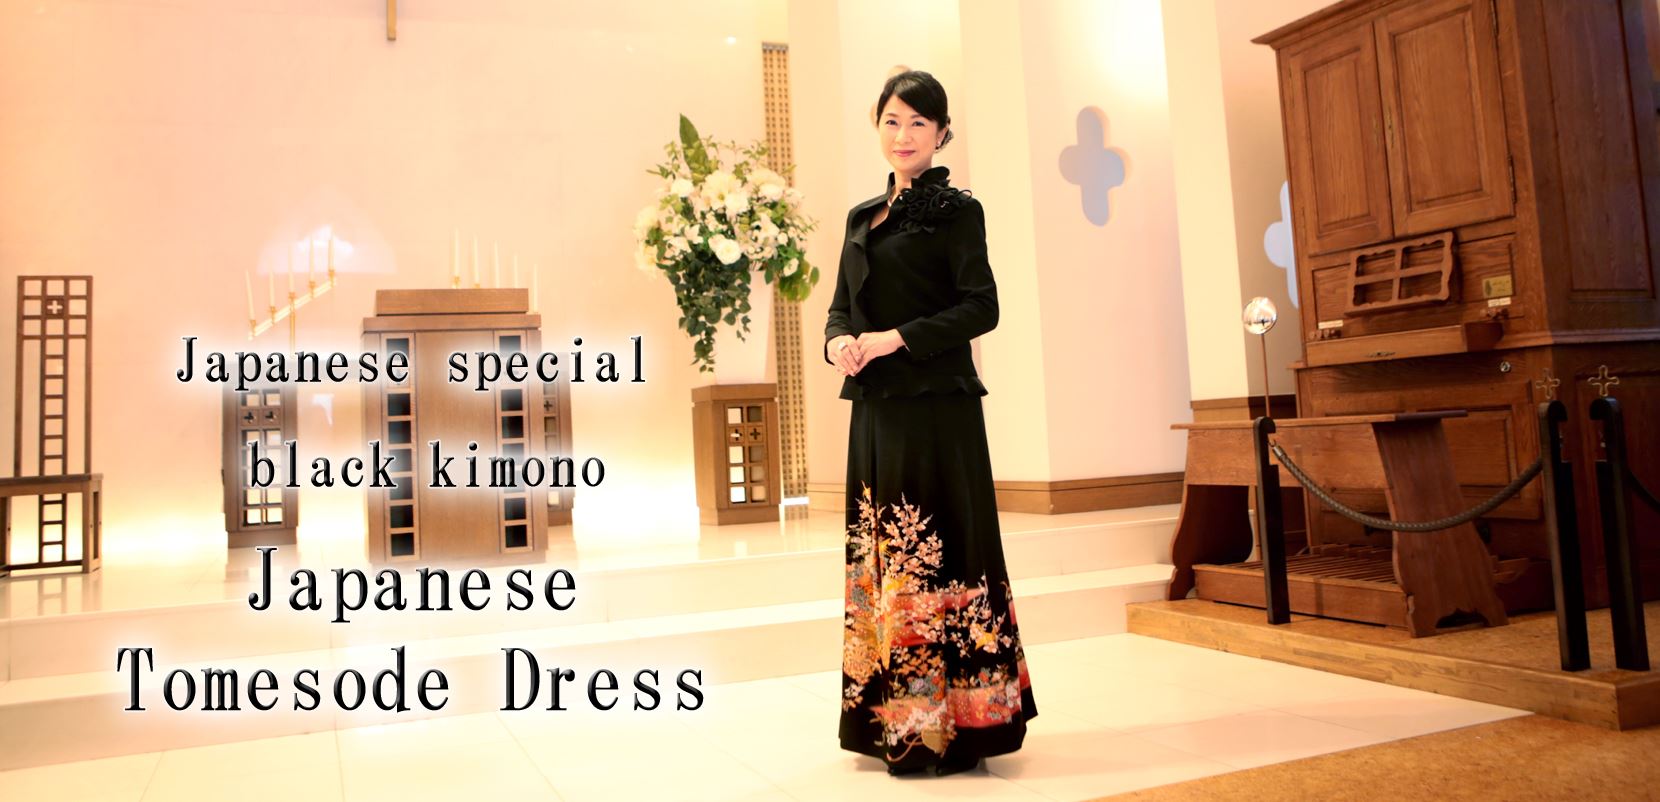 A classy woman in Japanese Tomesode Dress